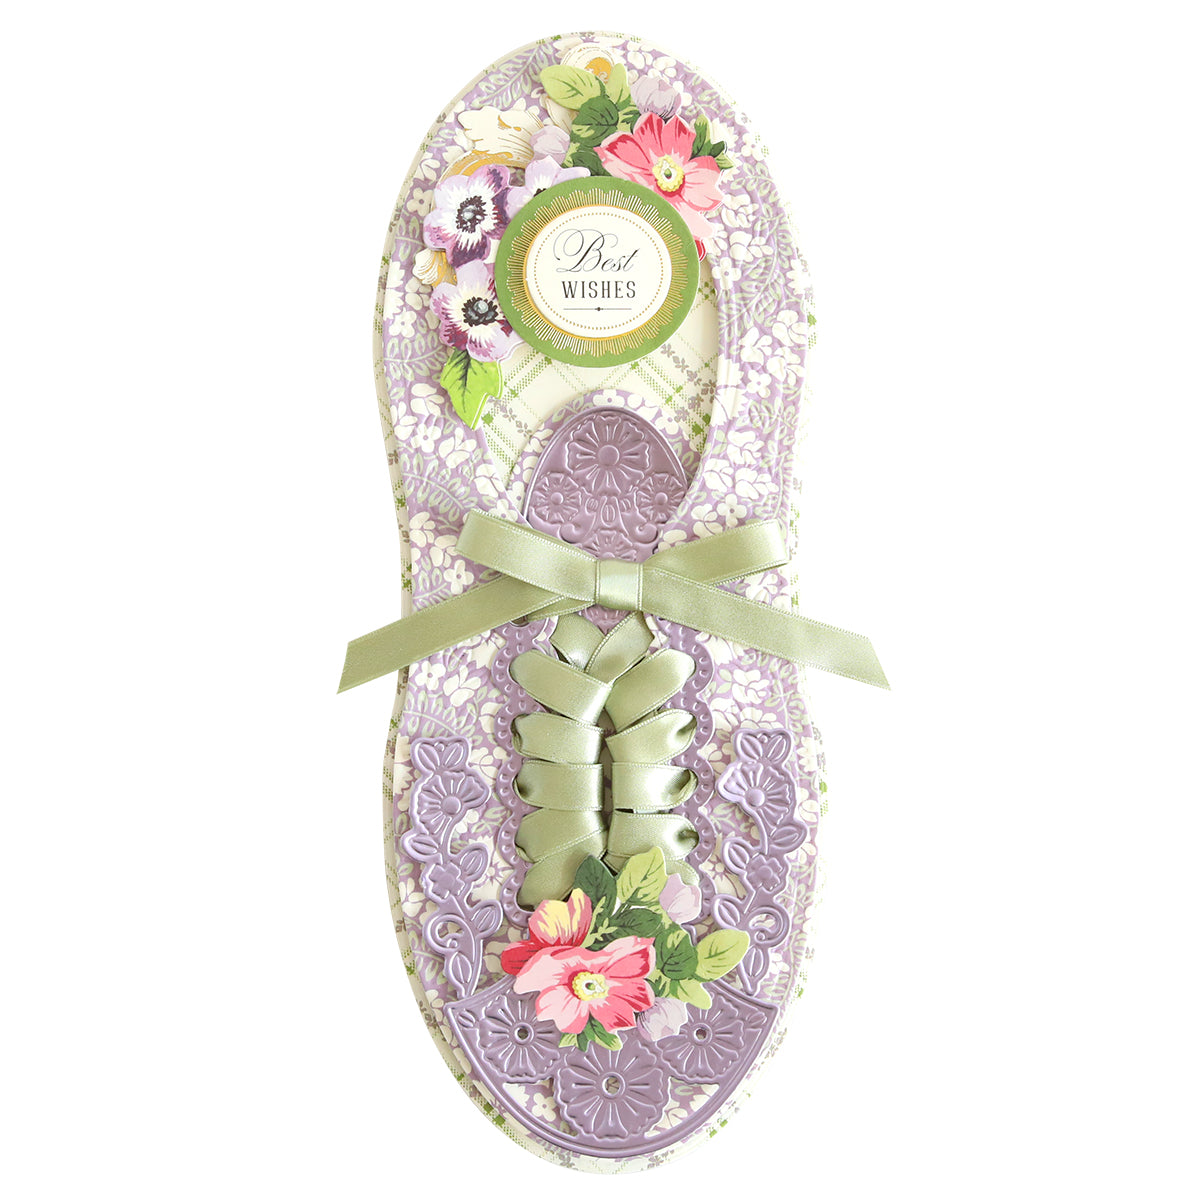 Decorative Paper Sneaker with floral embellishments and "best wishes" greeting.